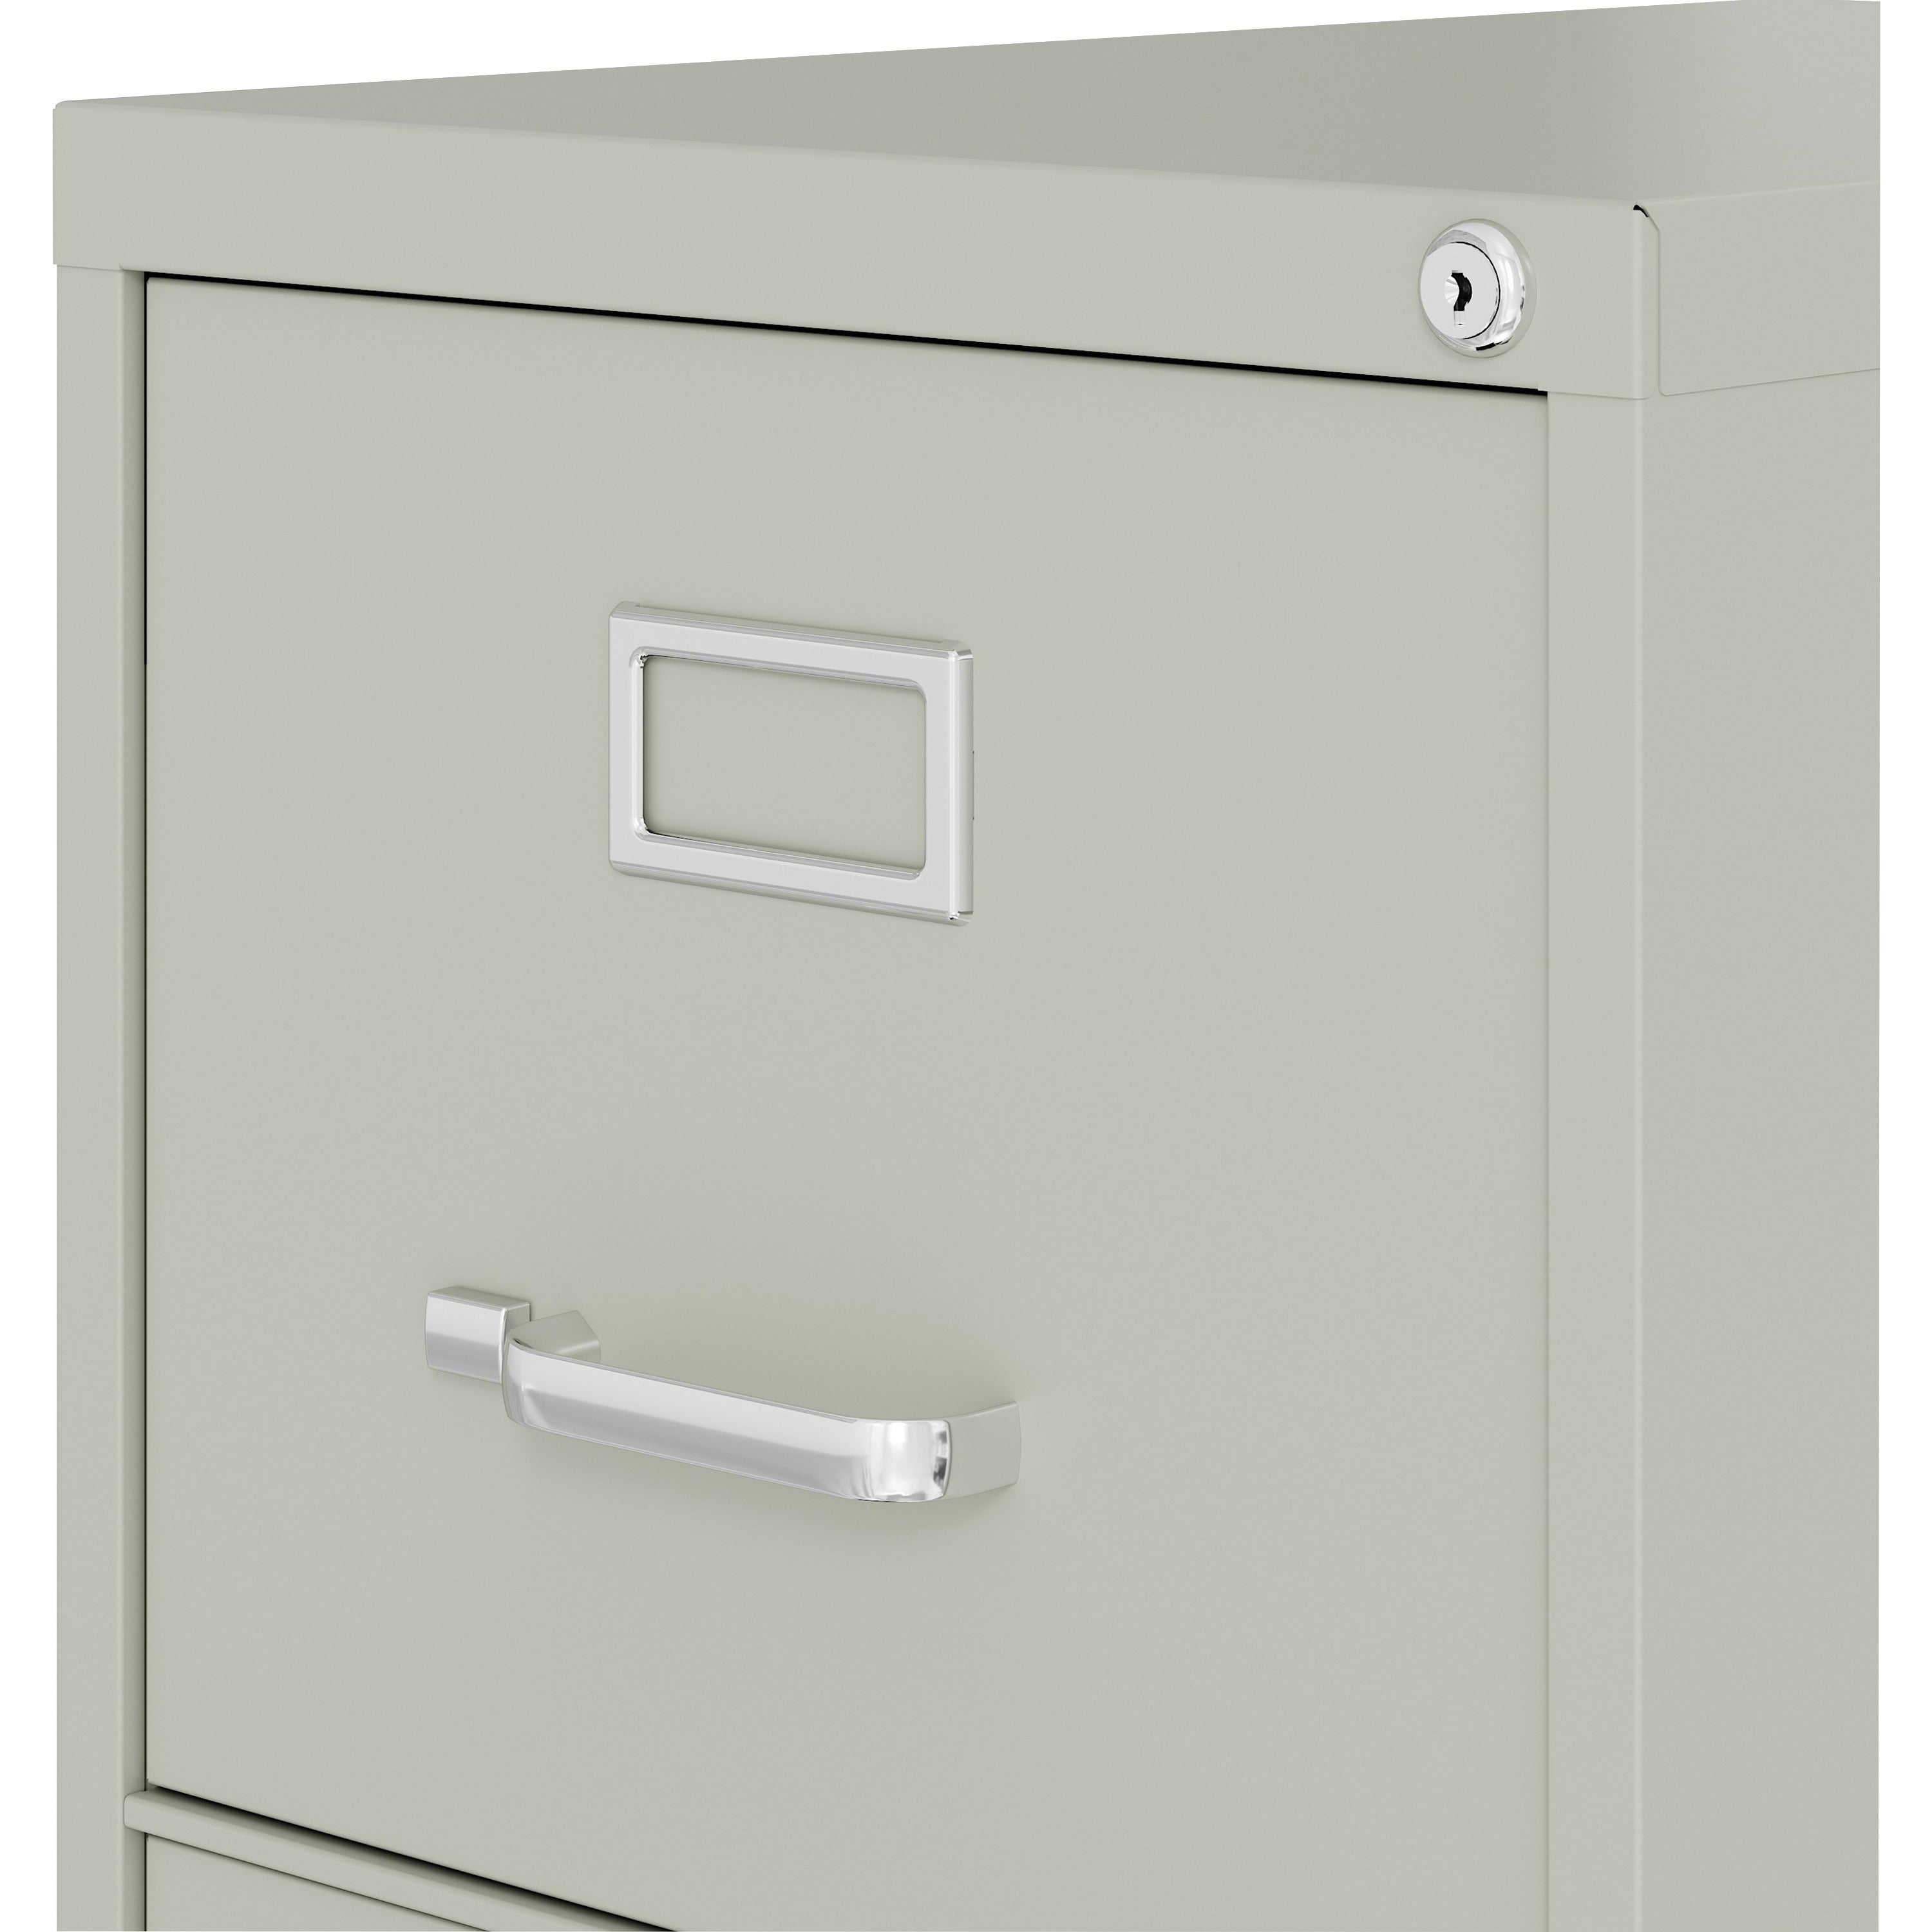 lorell-fortress-series-22-commercial-grade-vertical-file-cabinet-15-x-22-x-402-3-x-drawers-for-file-letter-vertical-ball-bearing-suspension-removable-lock-pull-handle-wire-management-light-gray-steel-recycled_llr42298 - 5